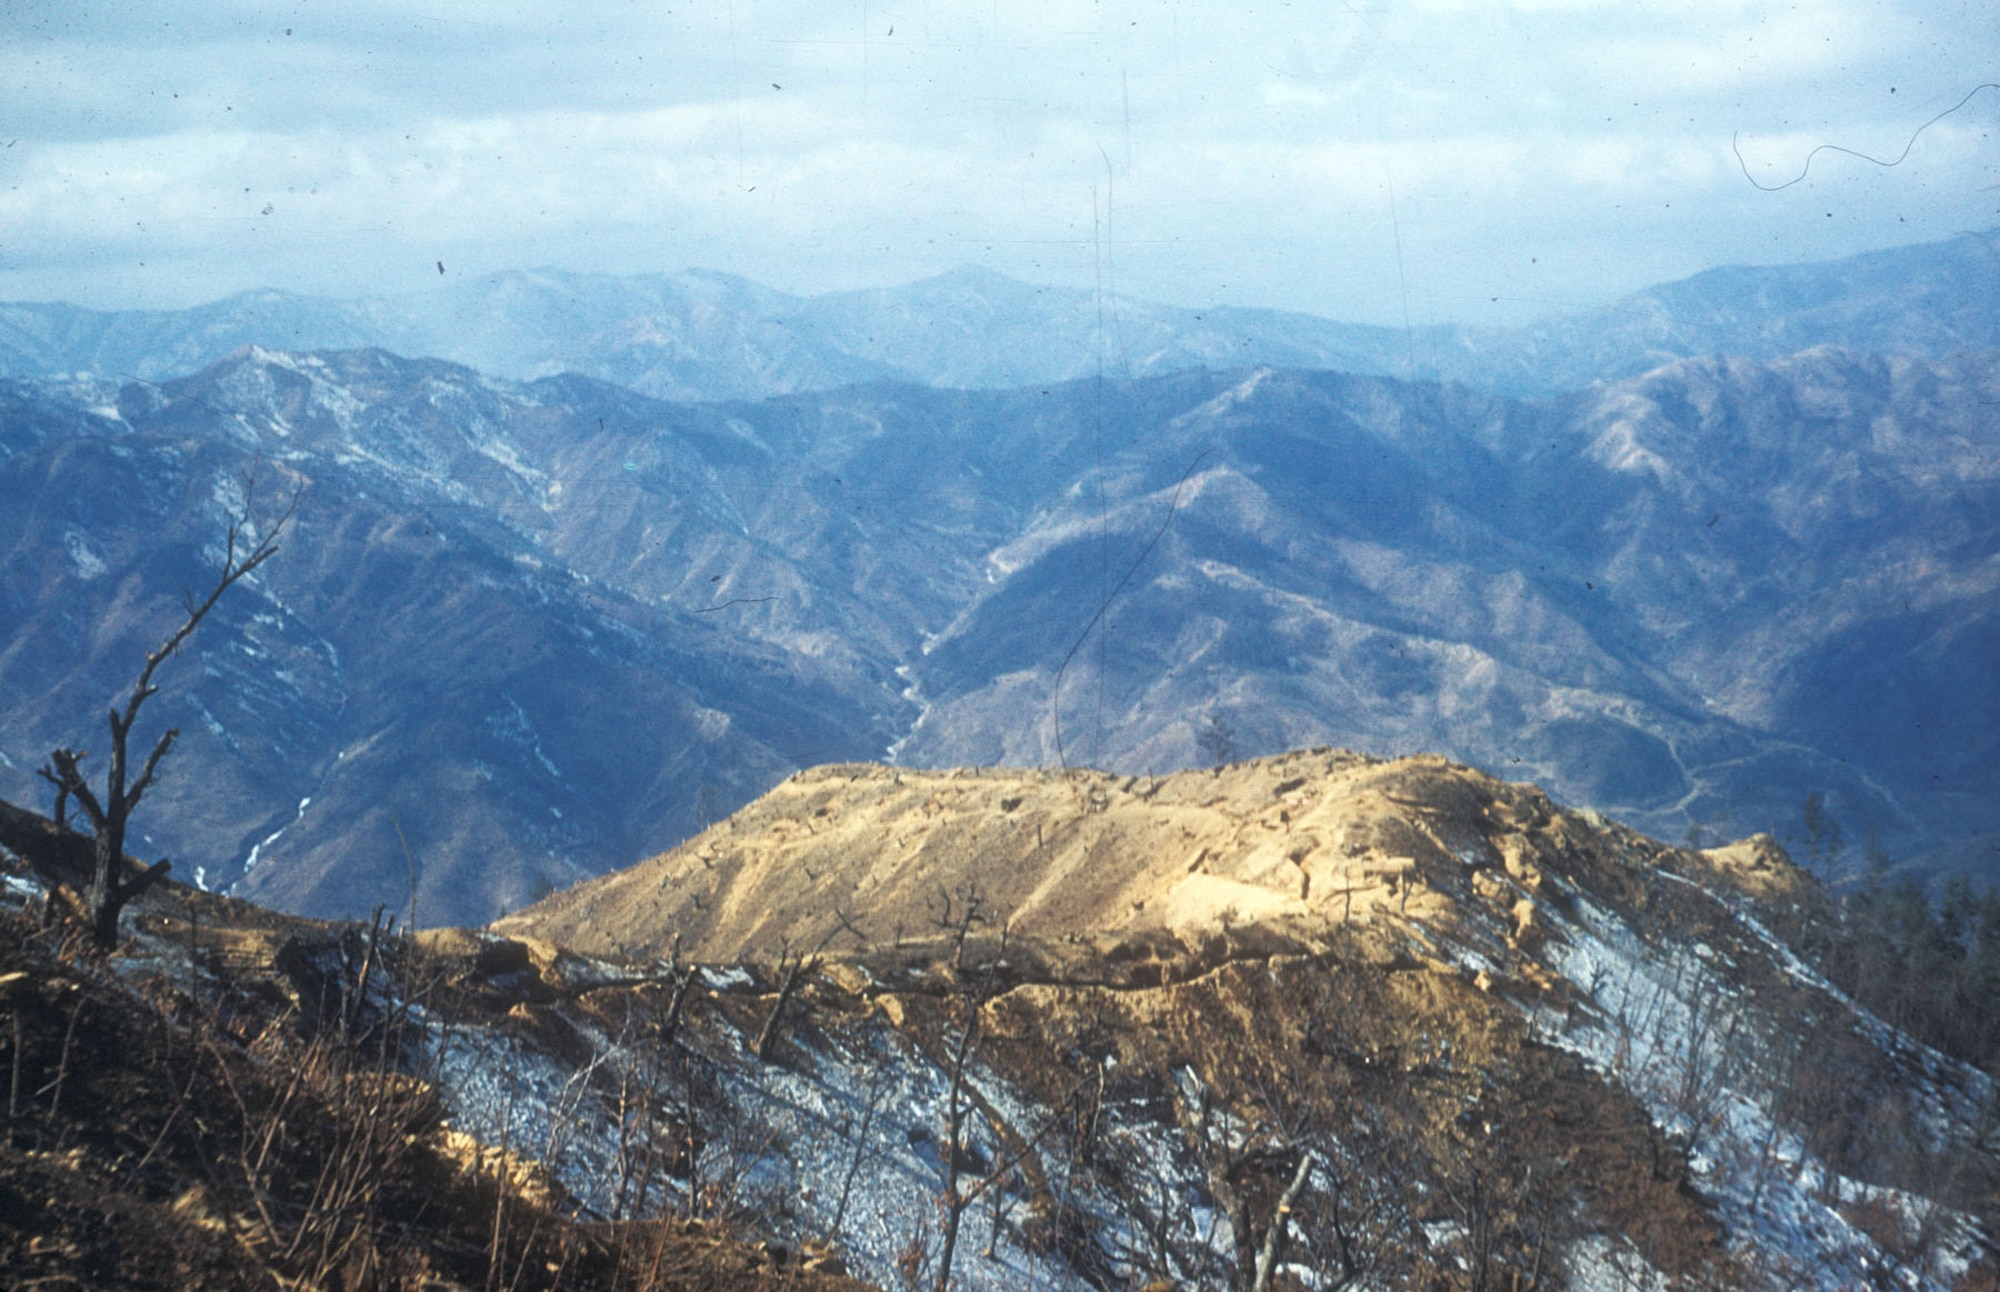 Desolate UN trench line along the mountainous 38th Parallel (also called the Main Line of Resistance or MLR). Heartbreak Ridge, a fiercely contested position, is visible in the background. (U.S. Air Force photo)